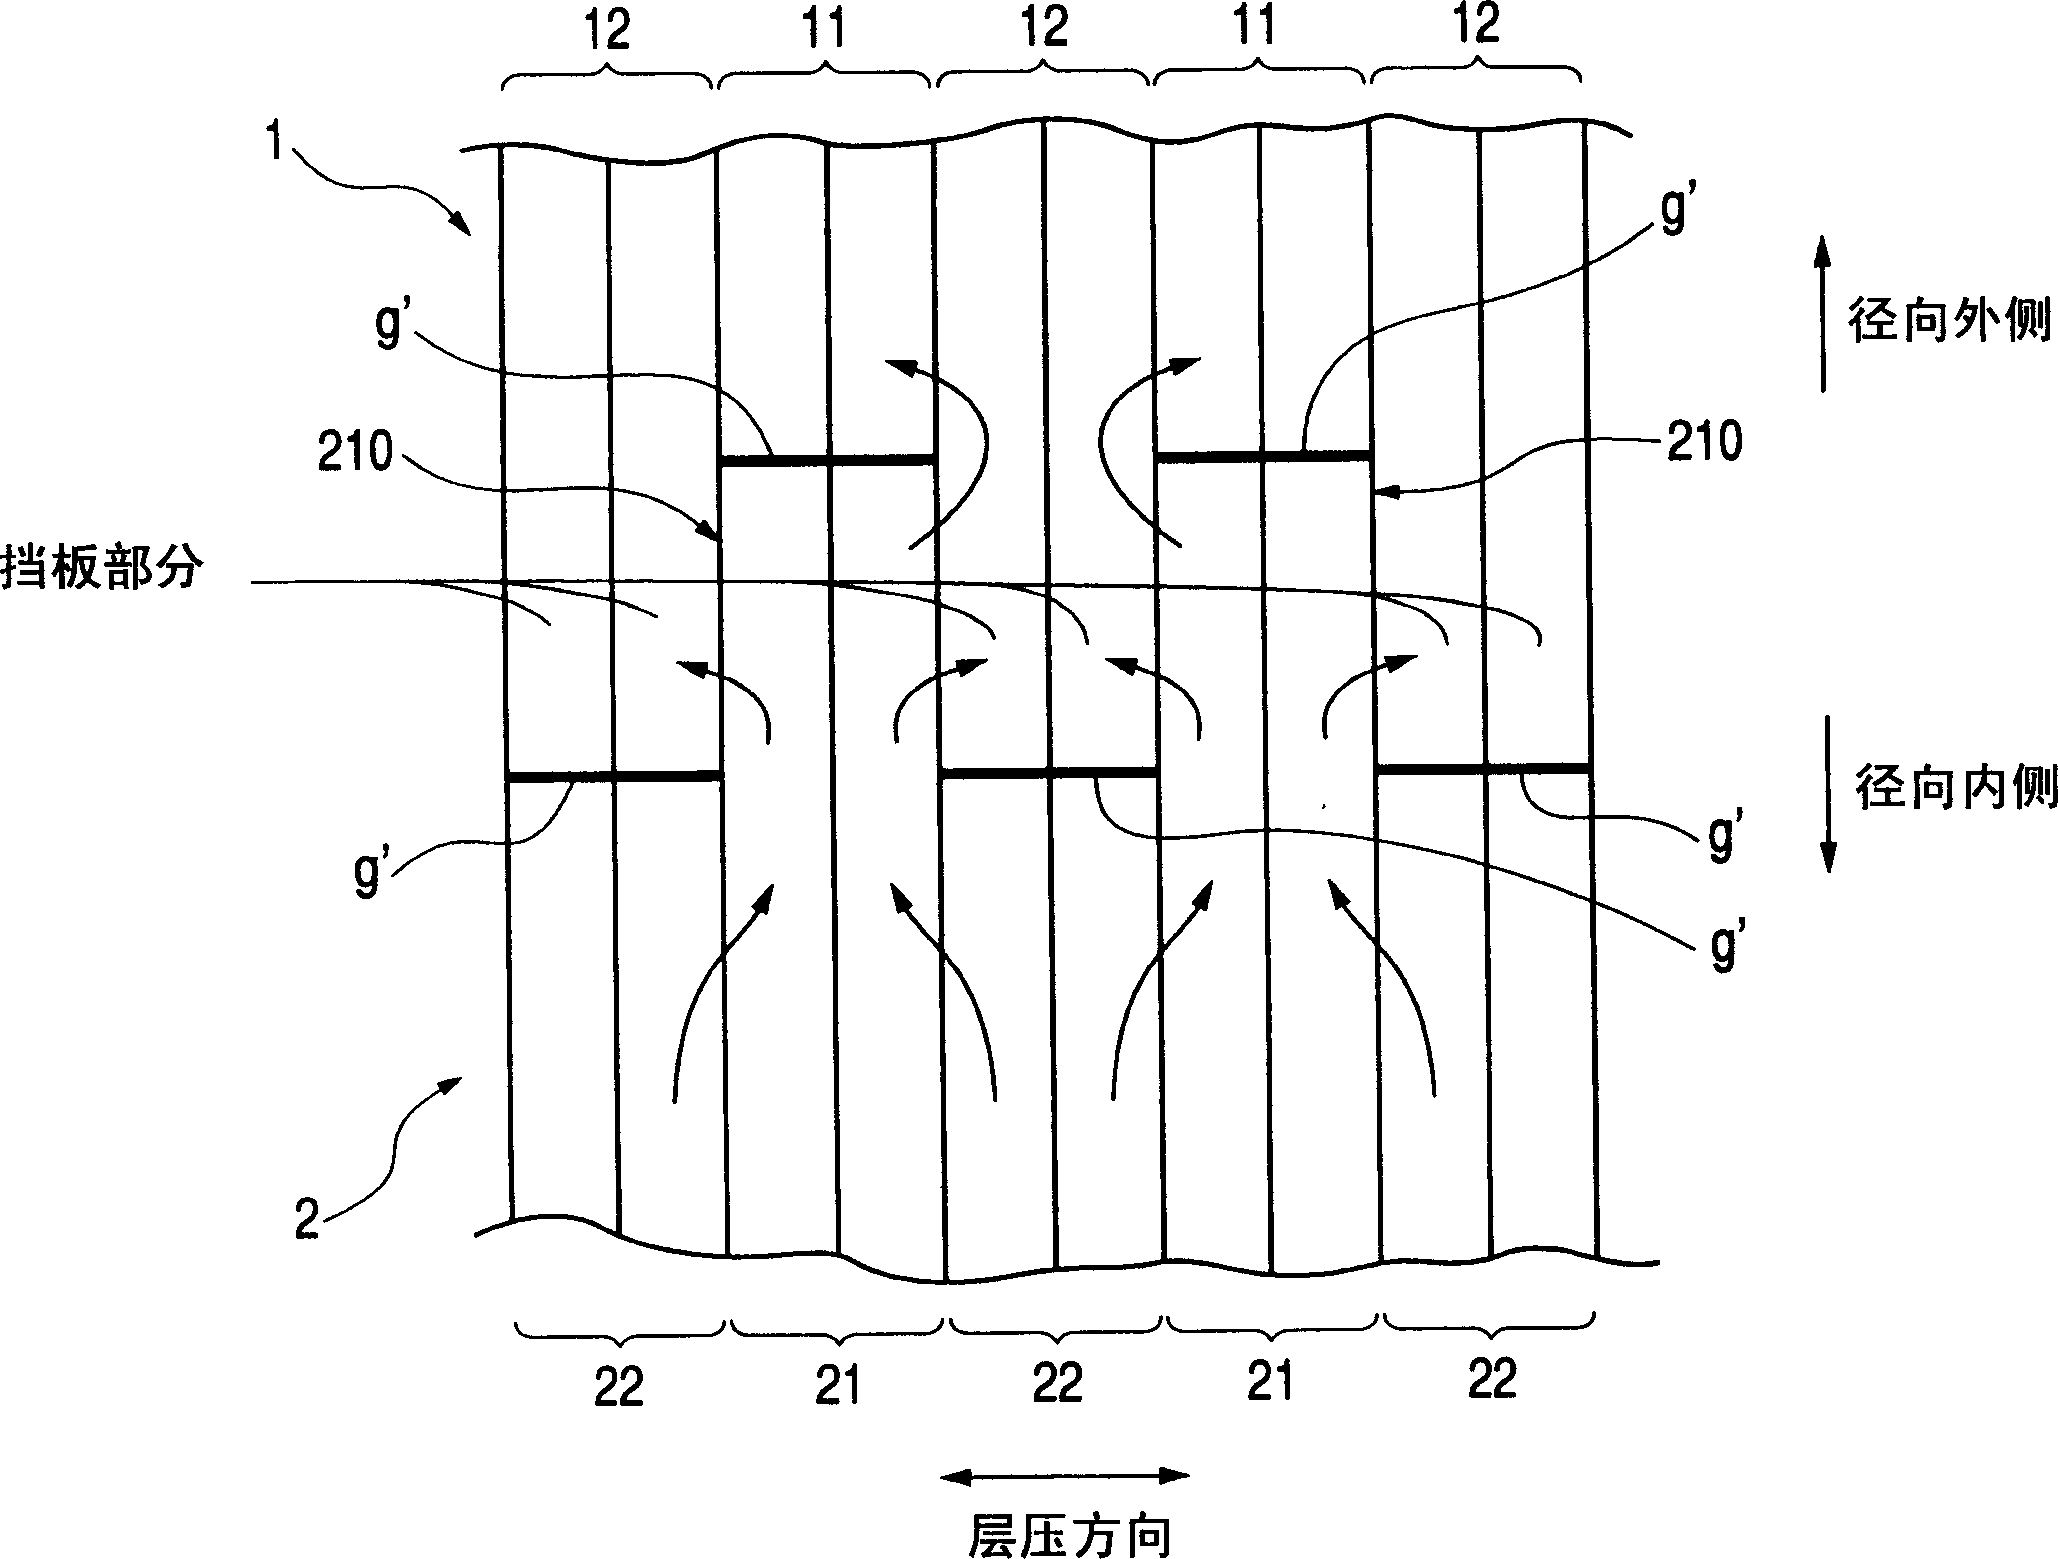 Combined stator core for electic rotary machinery